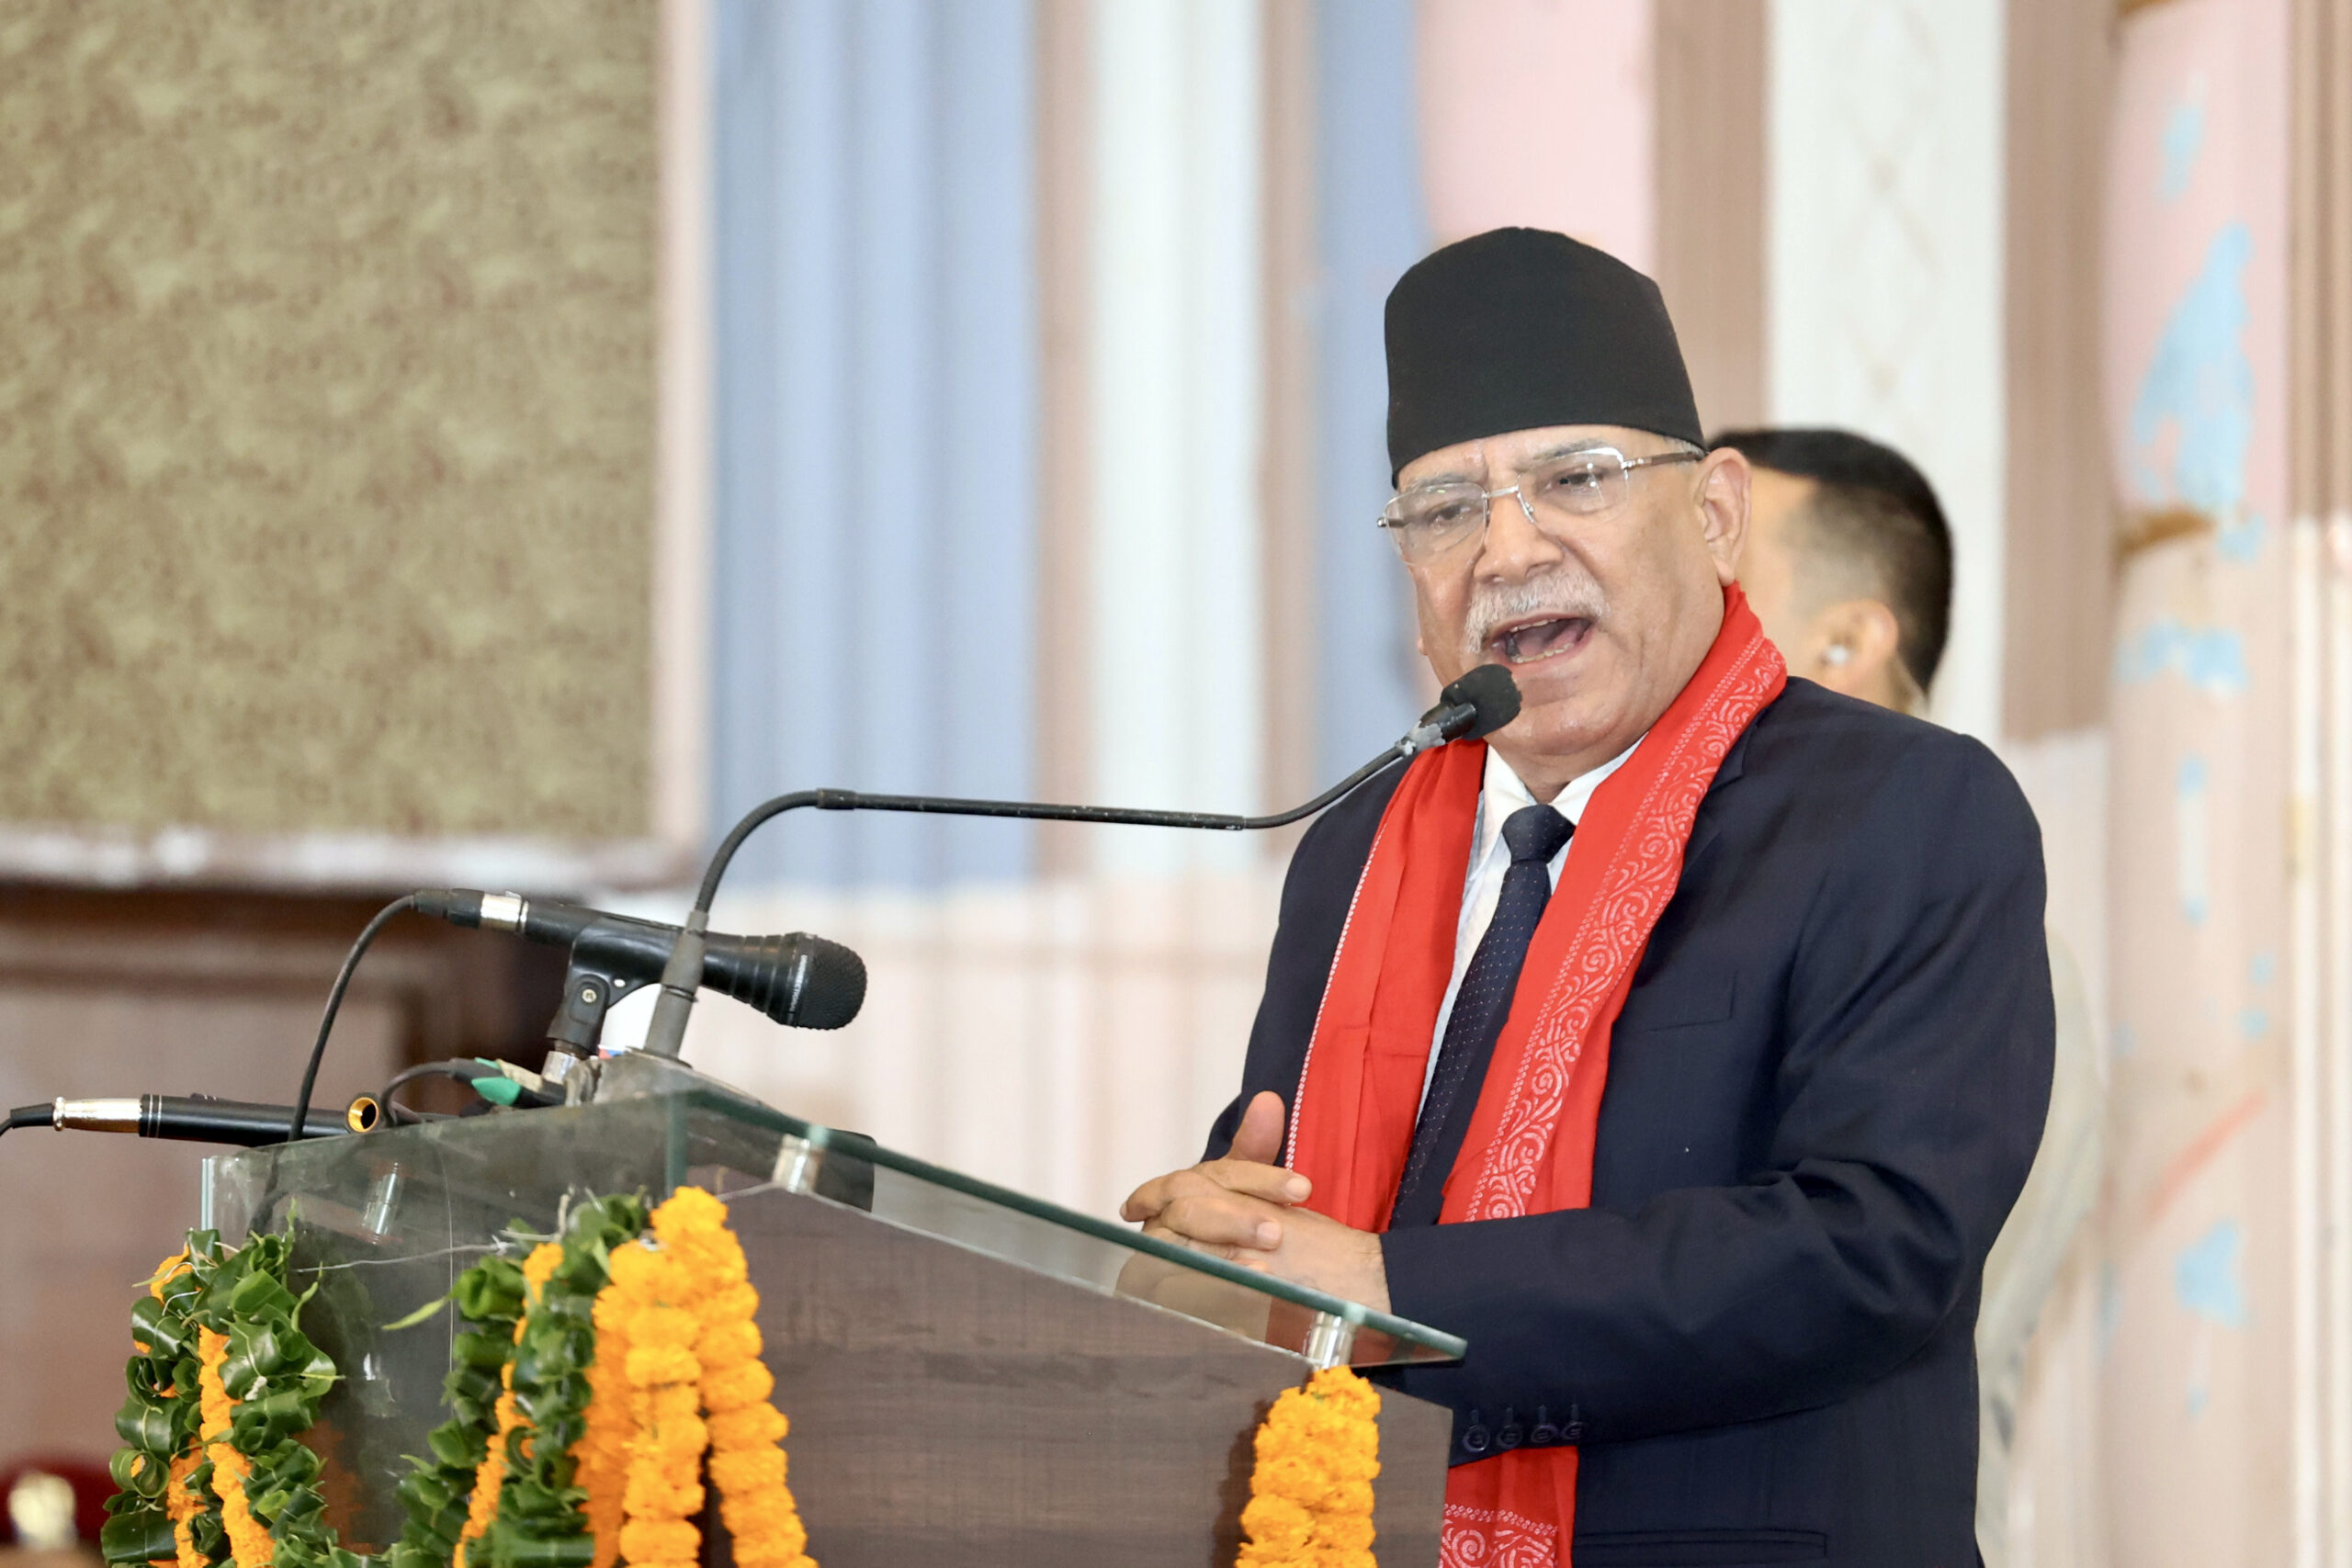 Govt serious about doctors’ safety: PM Dahal